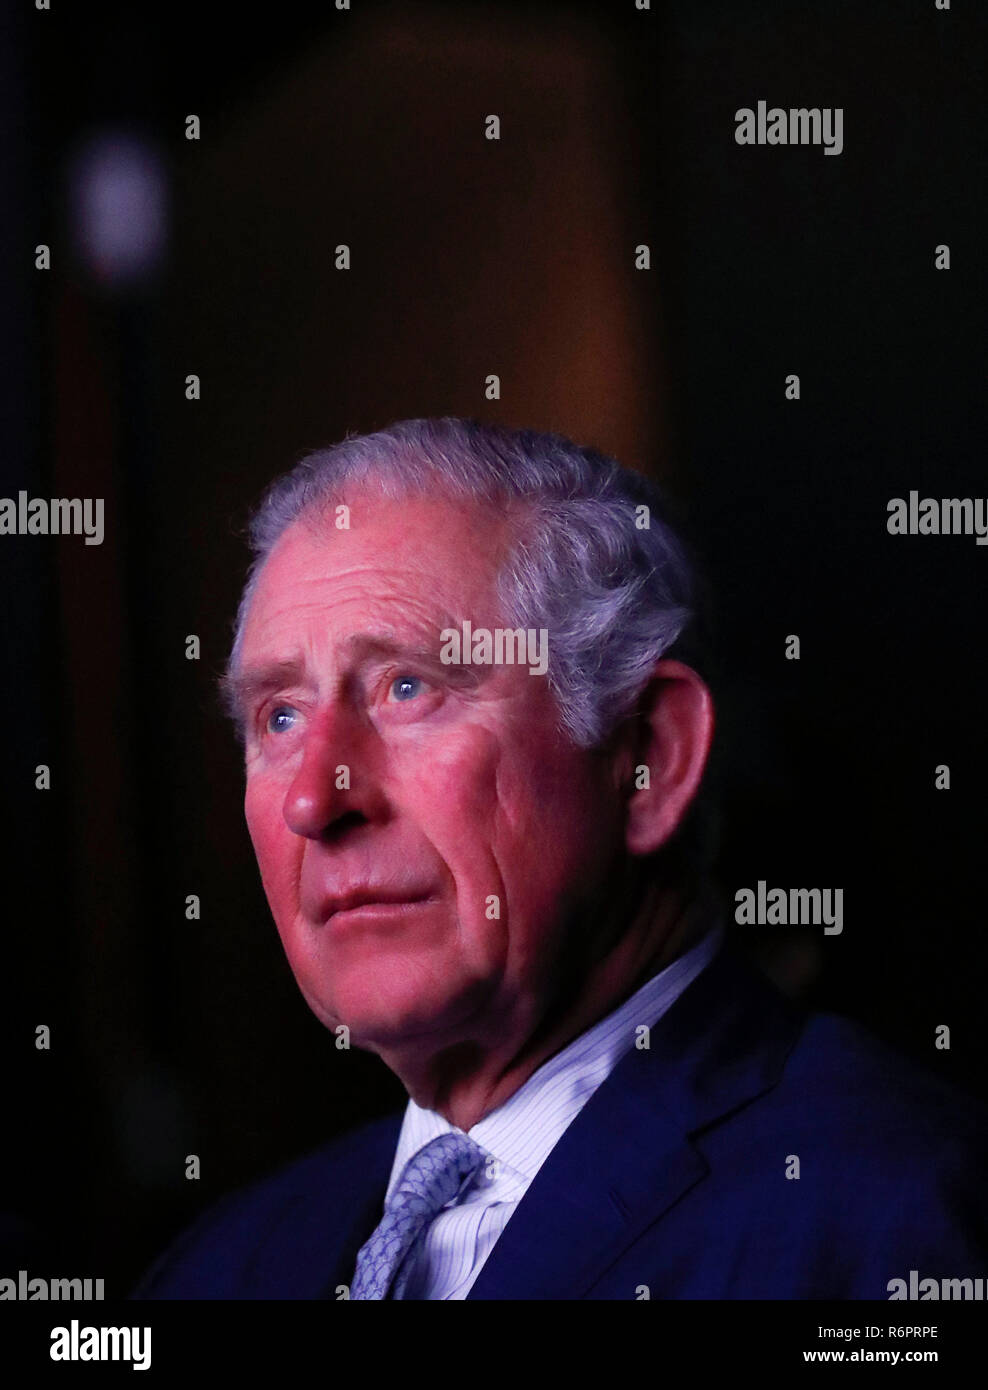 The Prince of Wales, patron of the British Film Institute (BFI), views Victorian era royal footage at the BFI Mediatheque during a visit BFI Southbank, London. Stock Photo